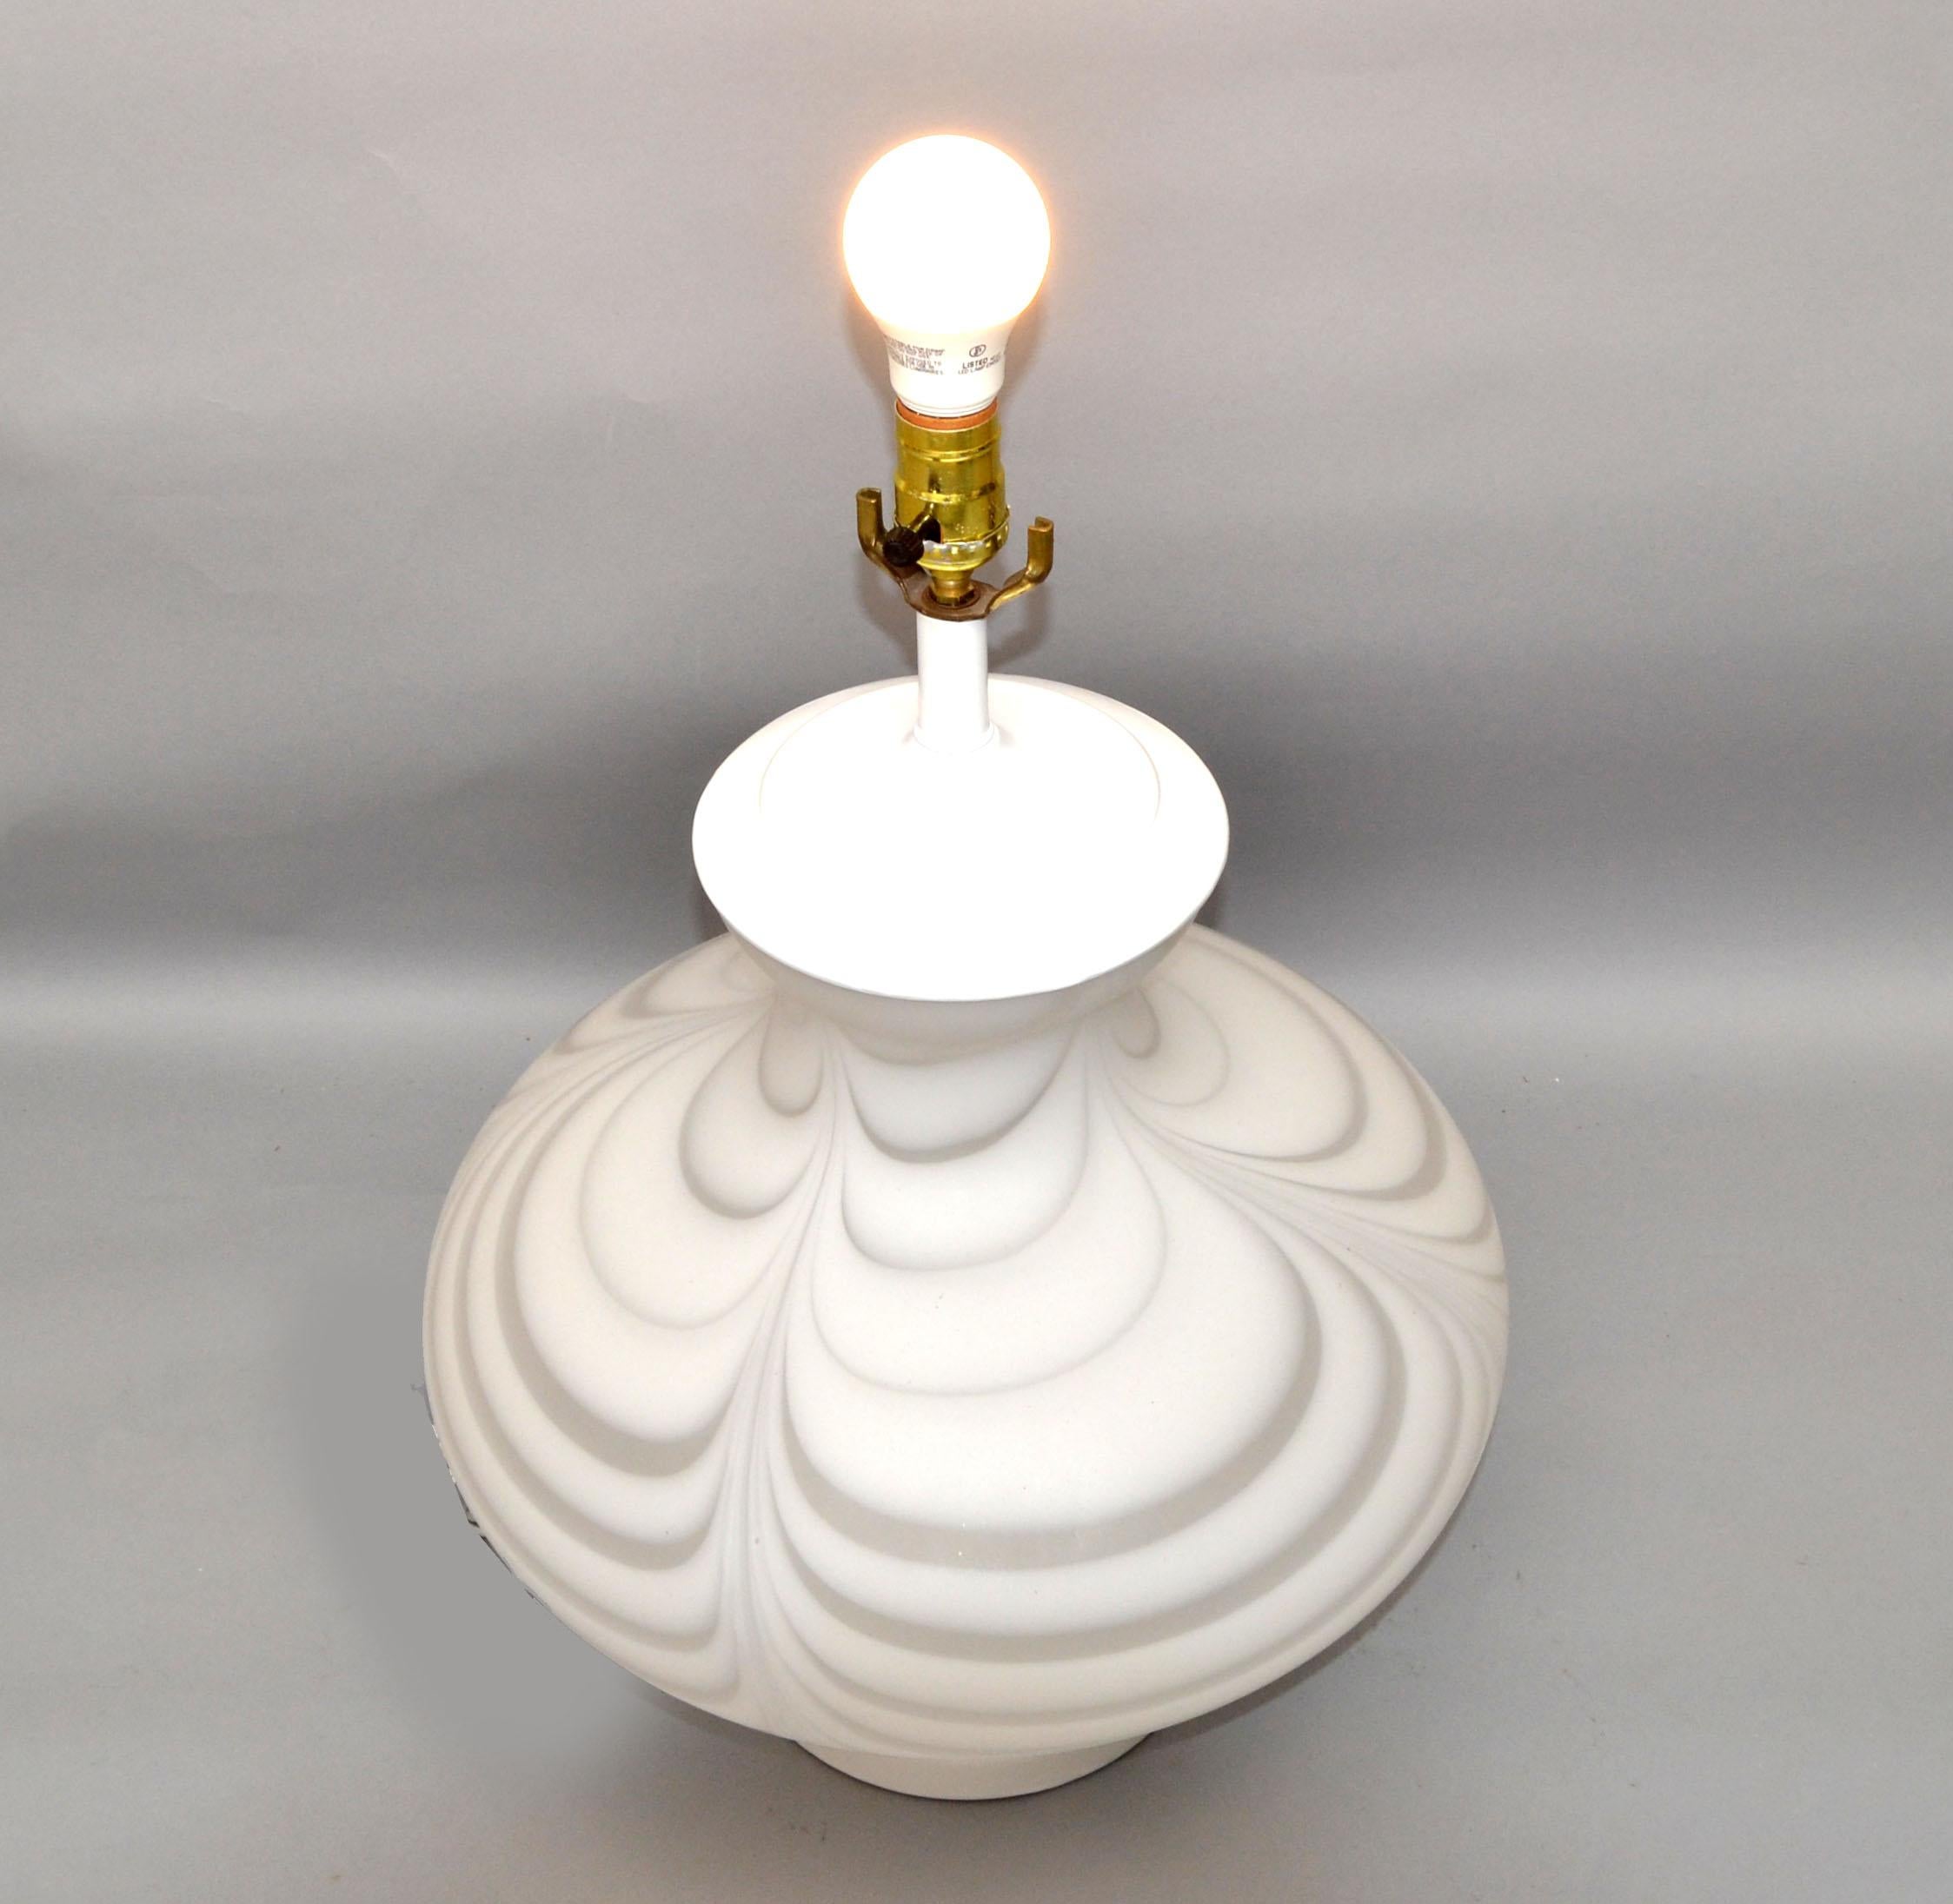 Hand-Crafted Mazzega Murano Style Table Lamp Swirled Mottled White Murano Glass 1970 Italy For Sale